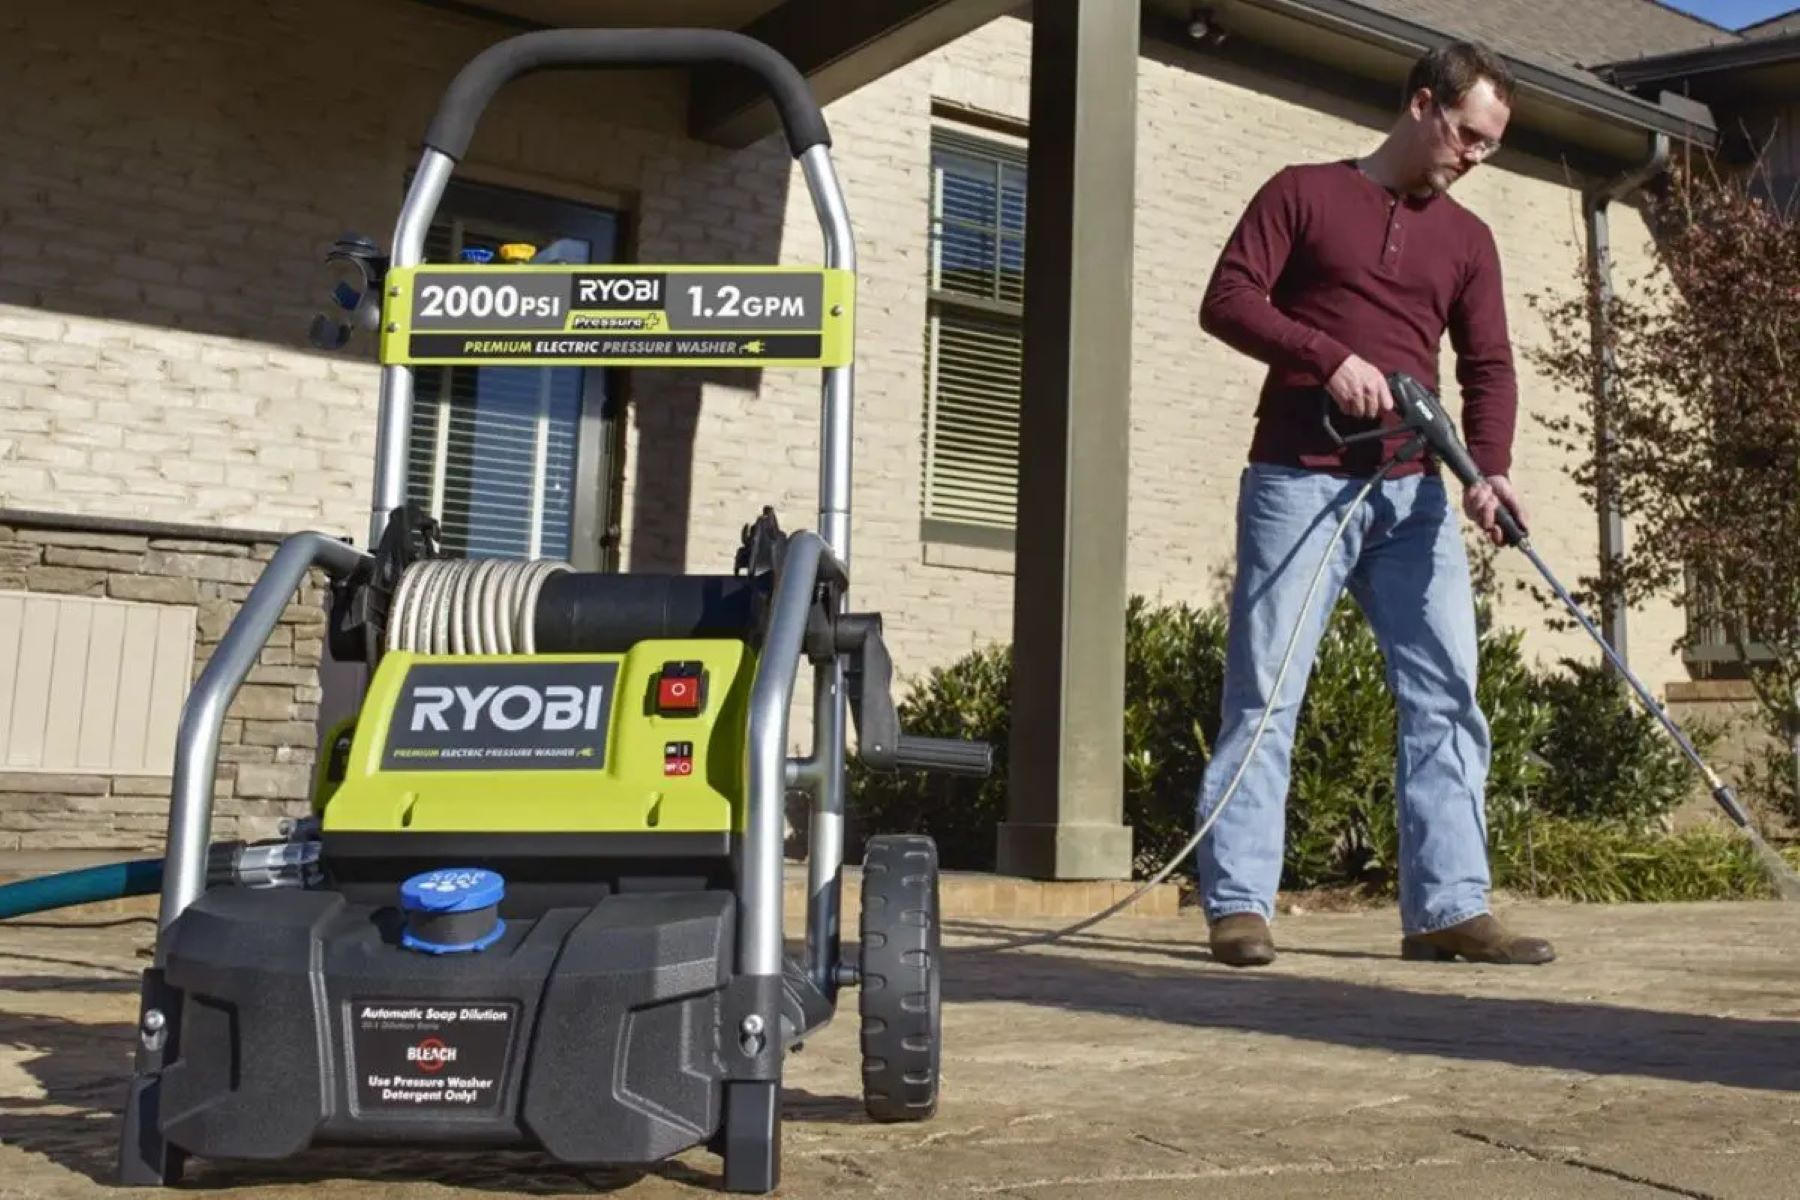 How To Use The Soap Dispenser On A Ryobi Pressure Washer